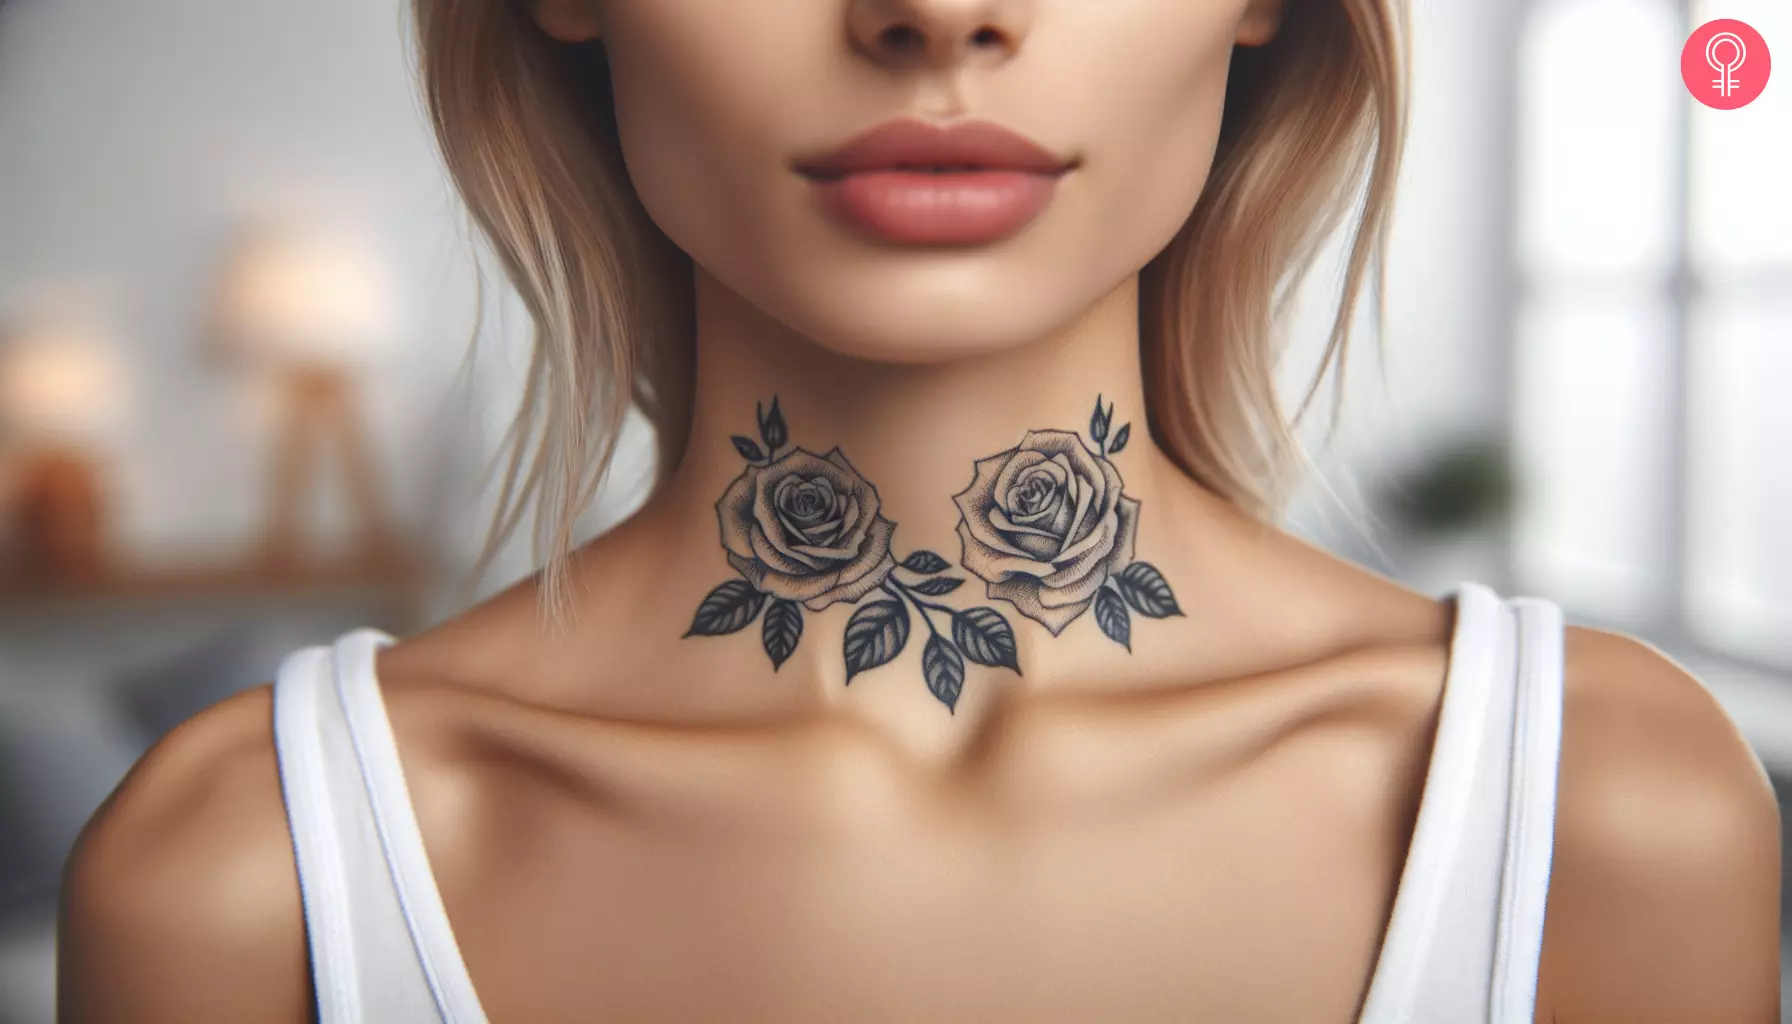 A woman with roses tattooed on her throat